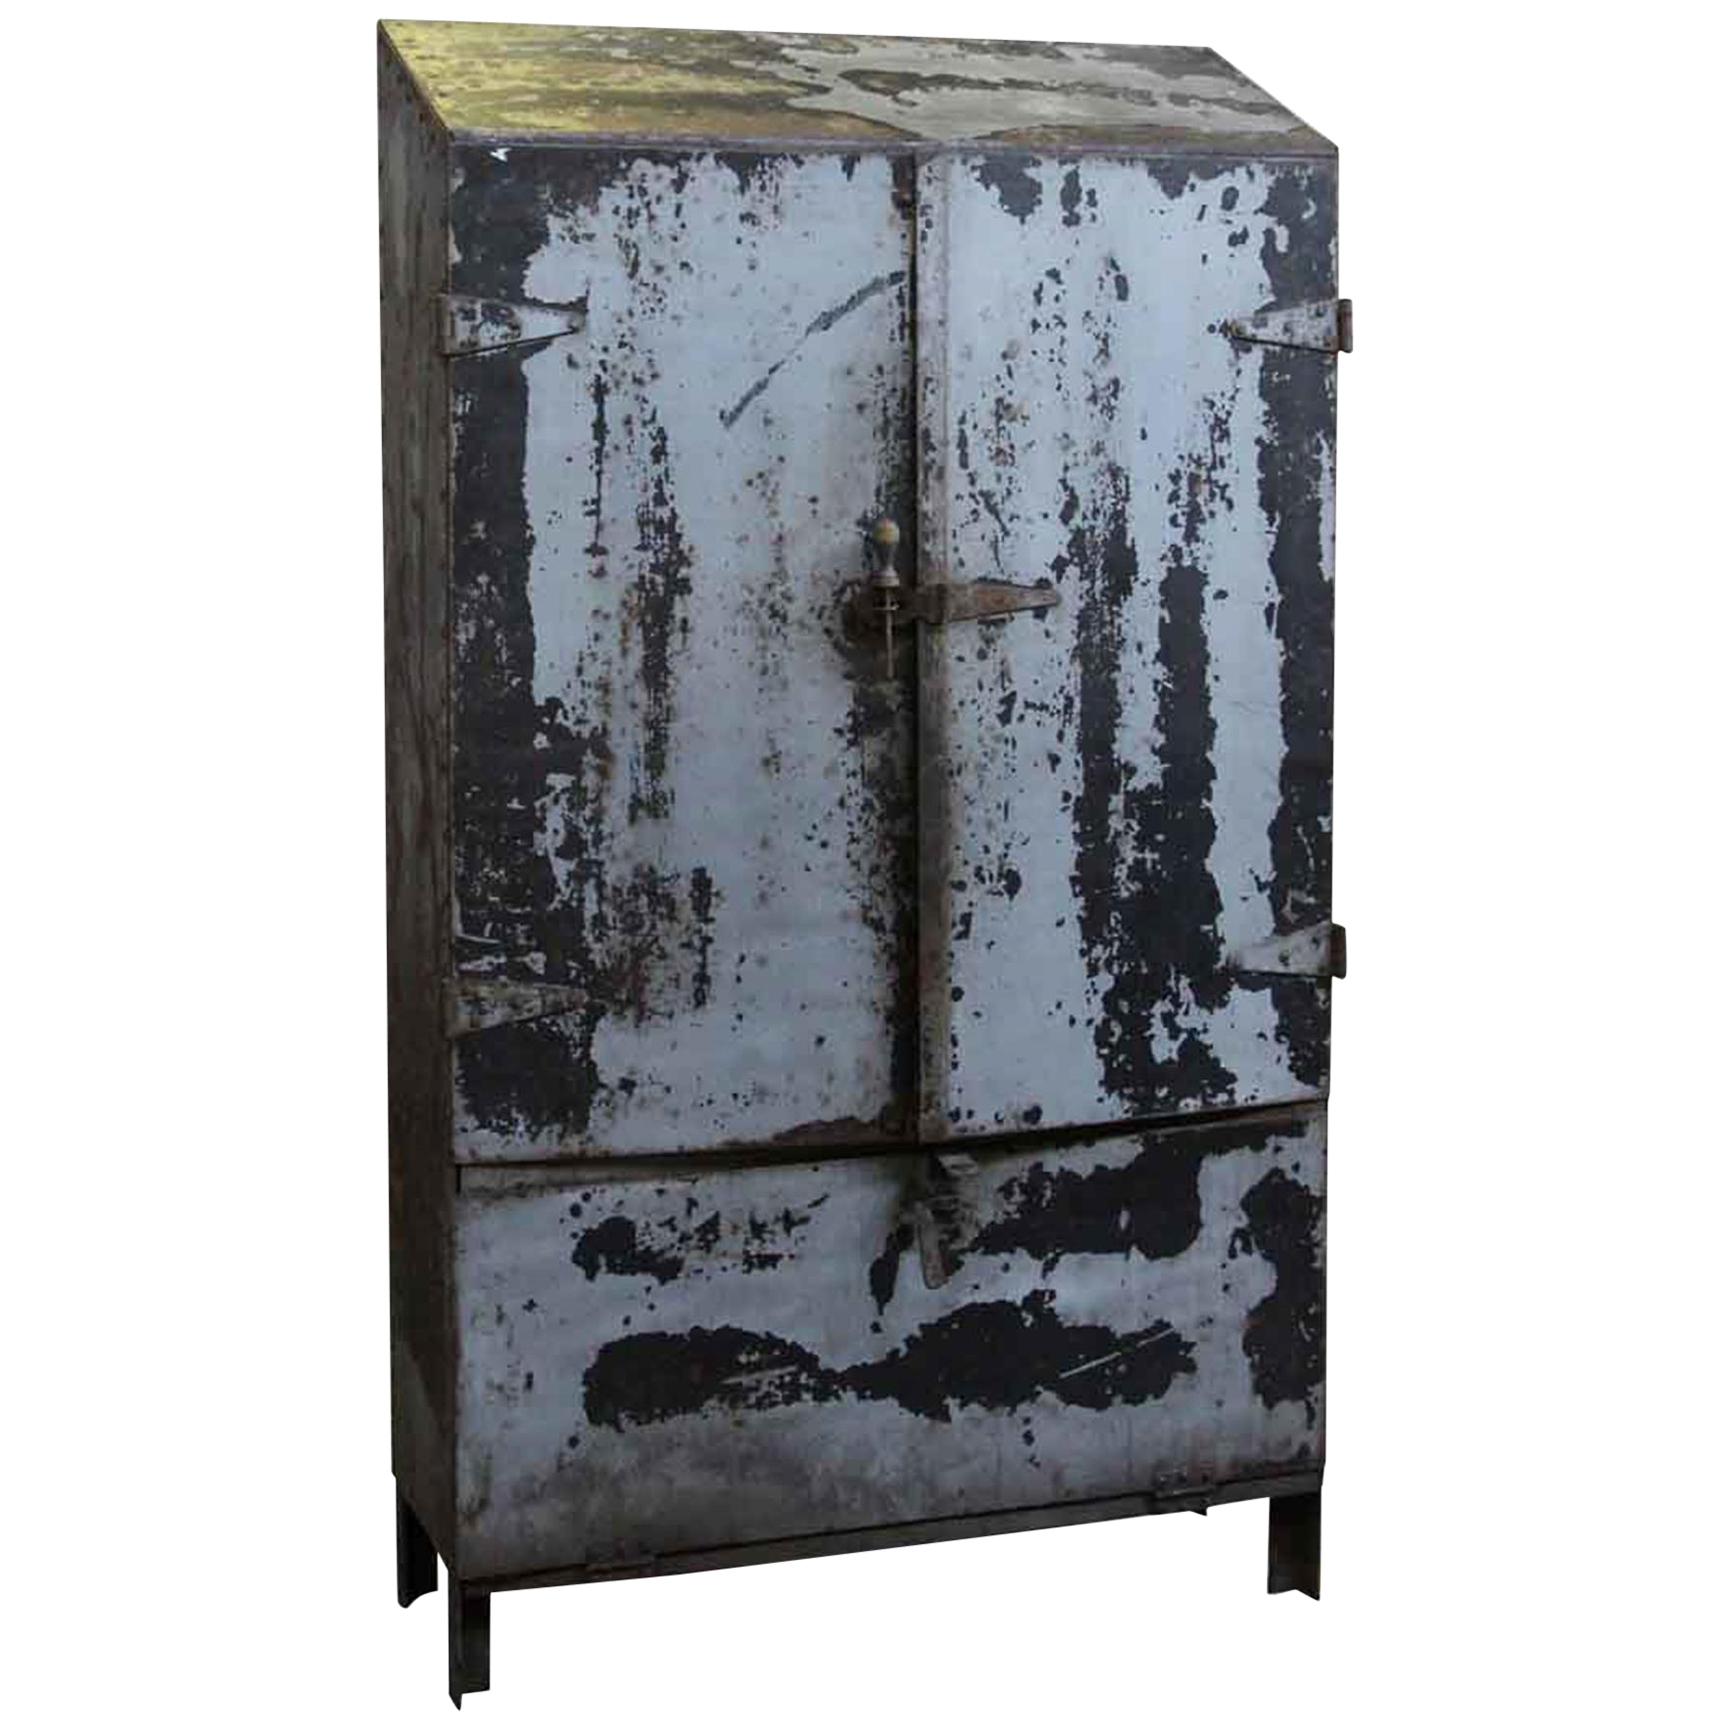 1930s Vintage Industrial Steel Cabinet Half Stripped and Lacquered